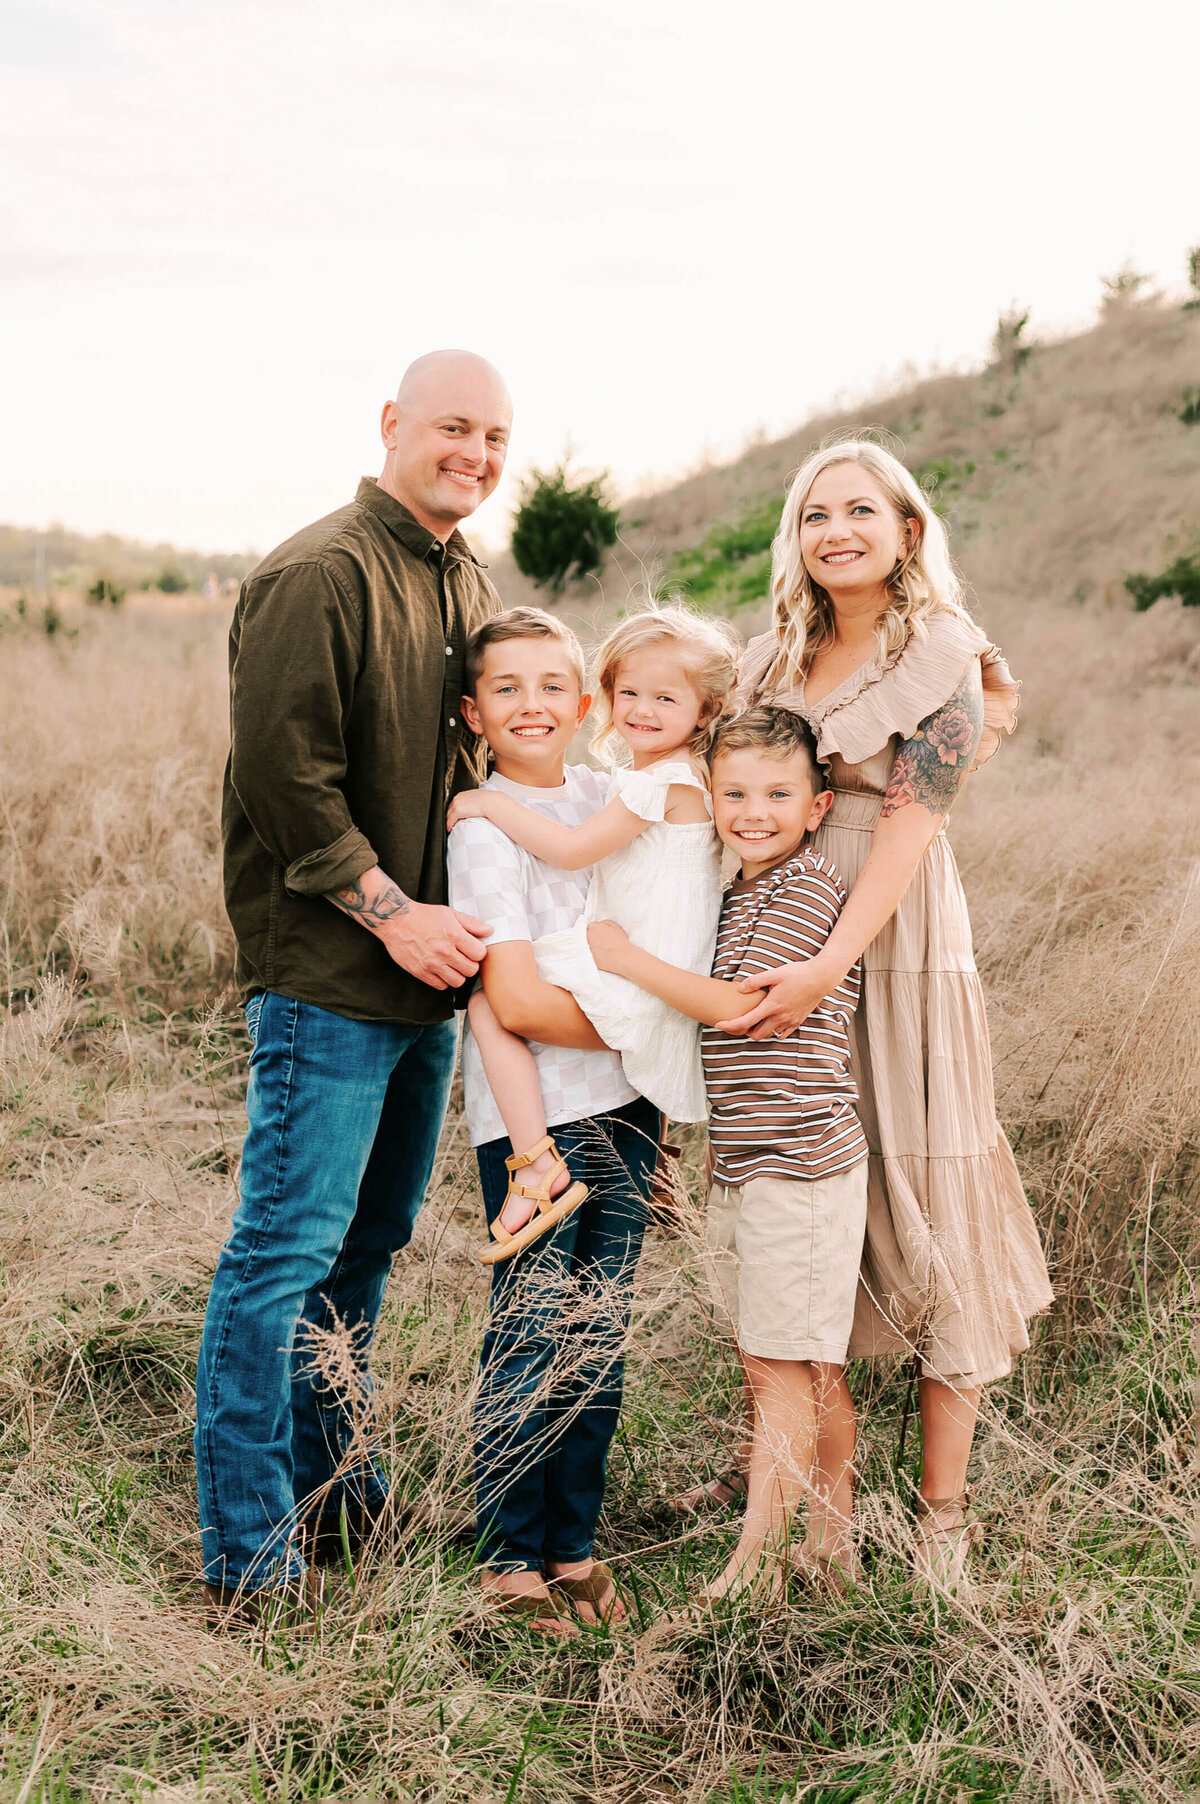 Springfield MO family photographer Jessica Kennedy of The XO Photography captures family standing on hillside